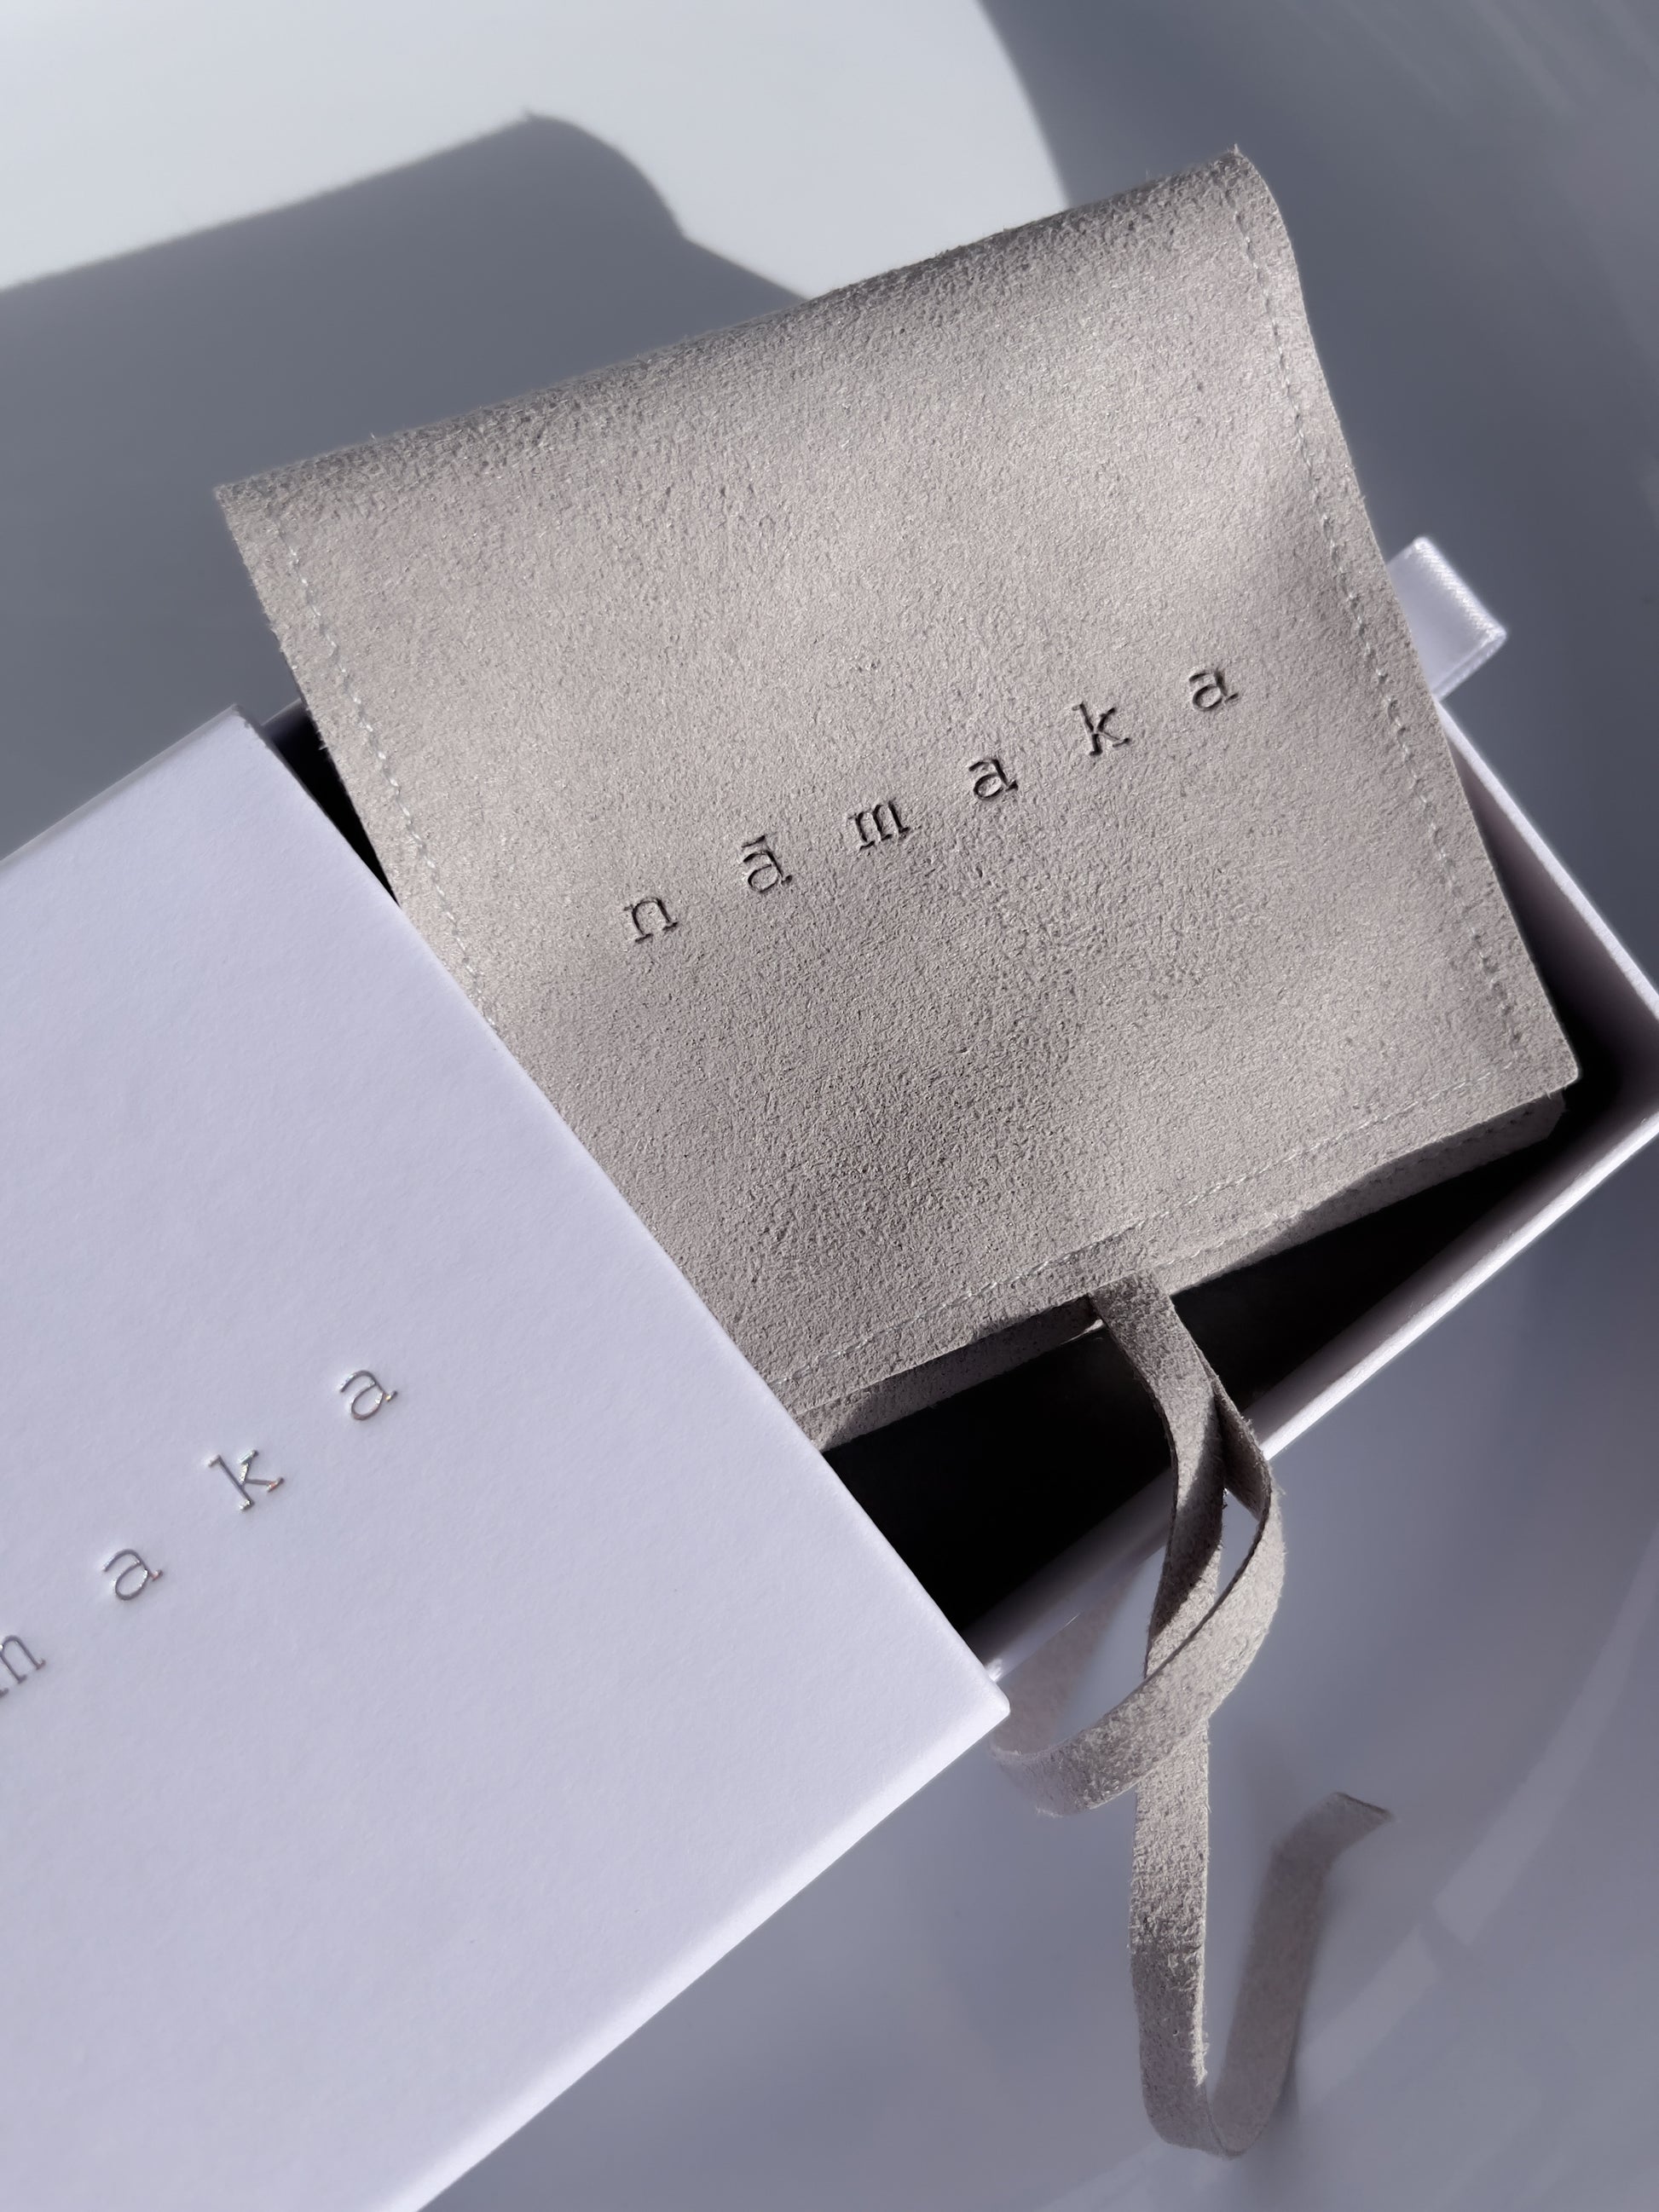  inside packaging design with pouch  made by nāmaka